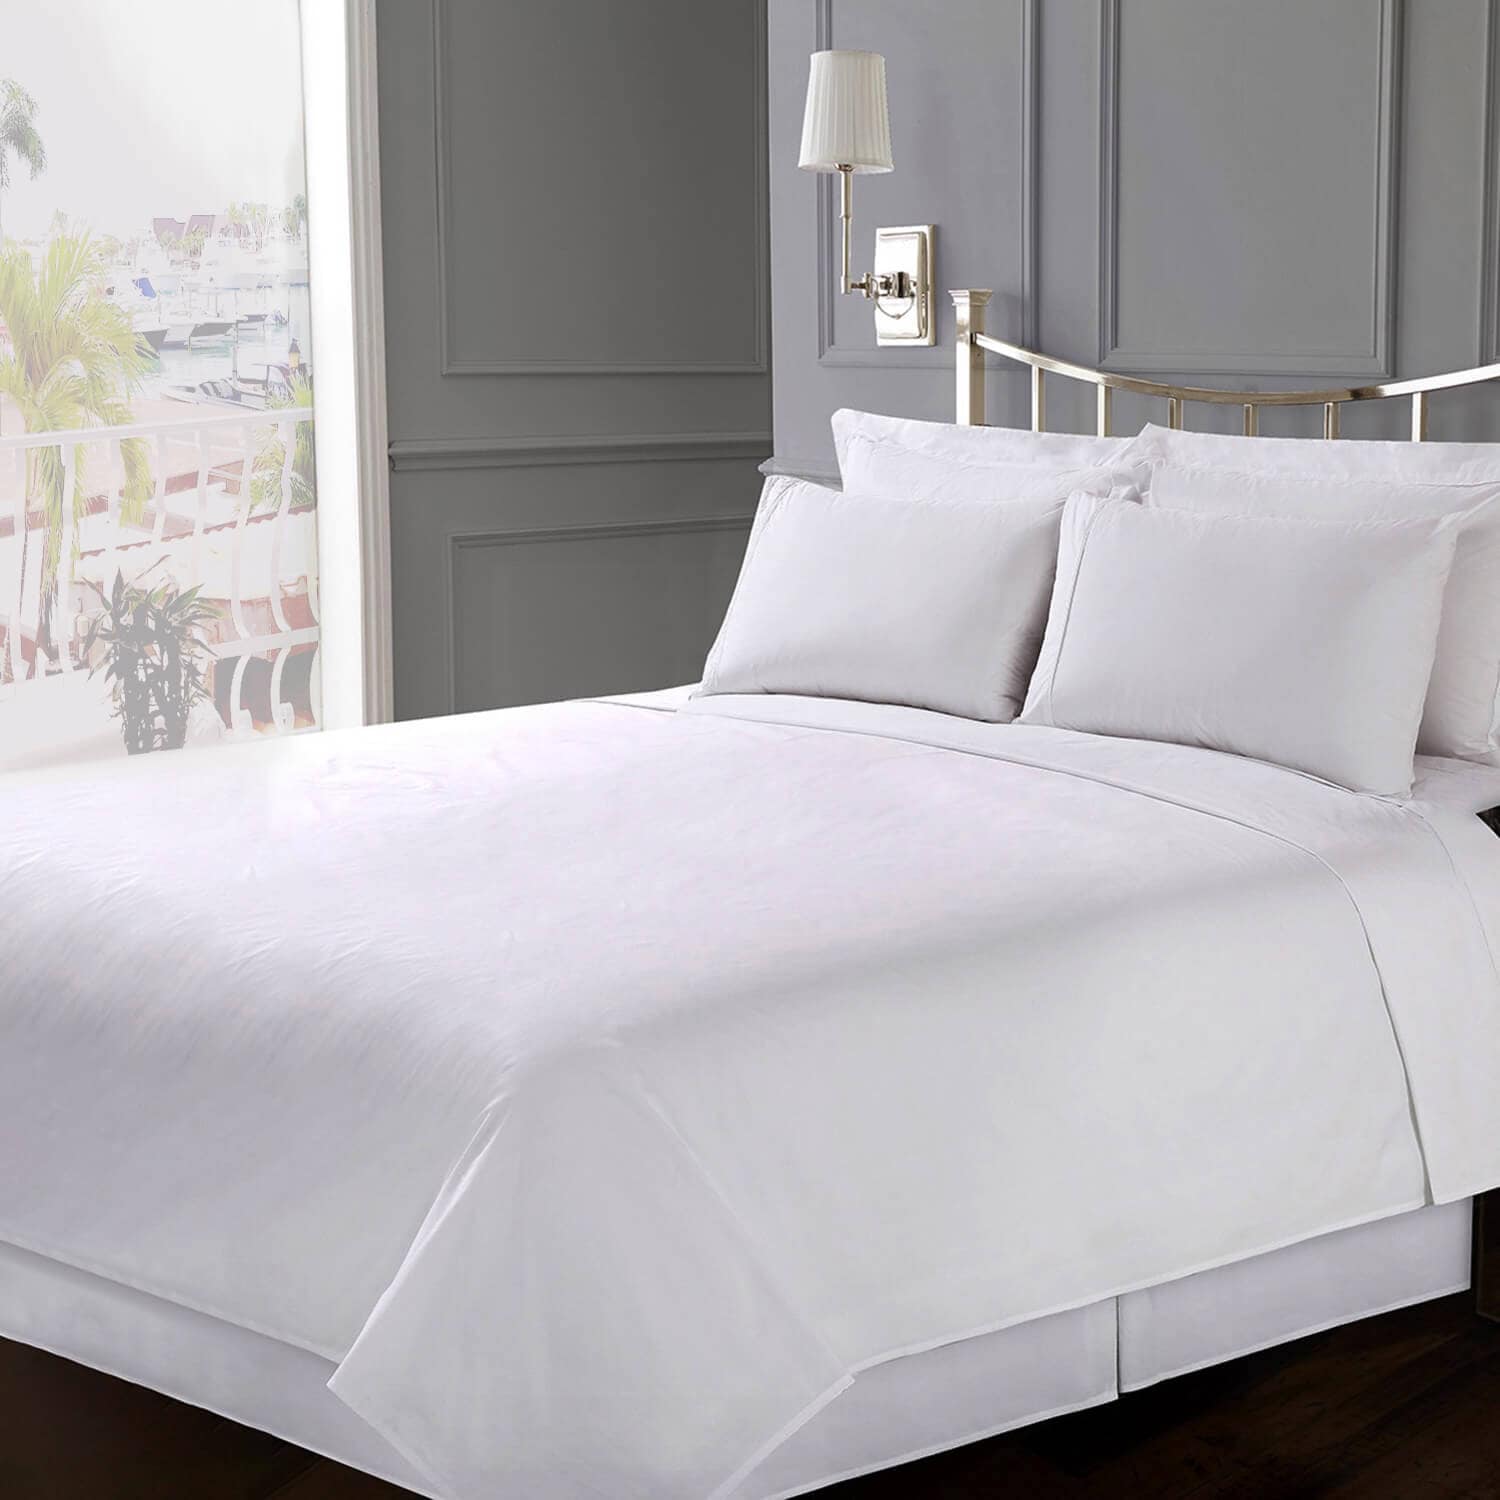 12 new bright white full size flat bed sheets t180 percale hotel quality 